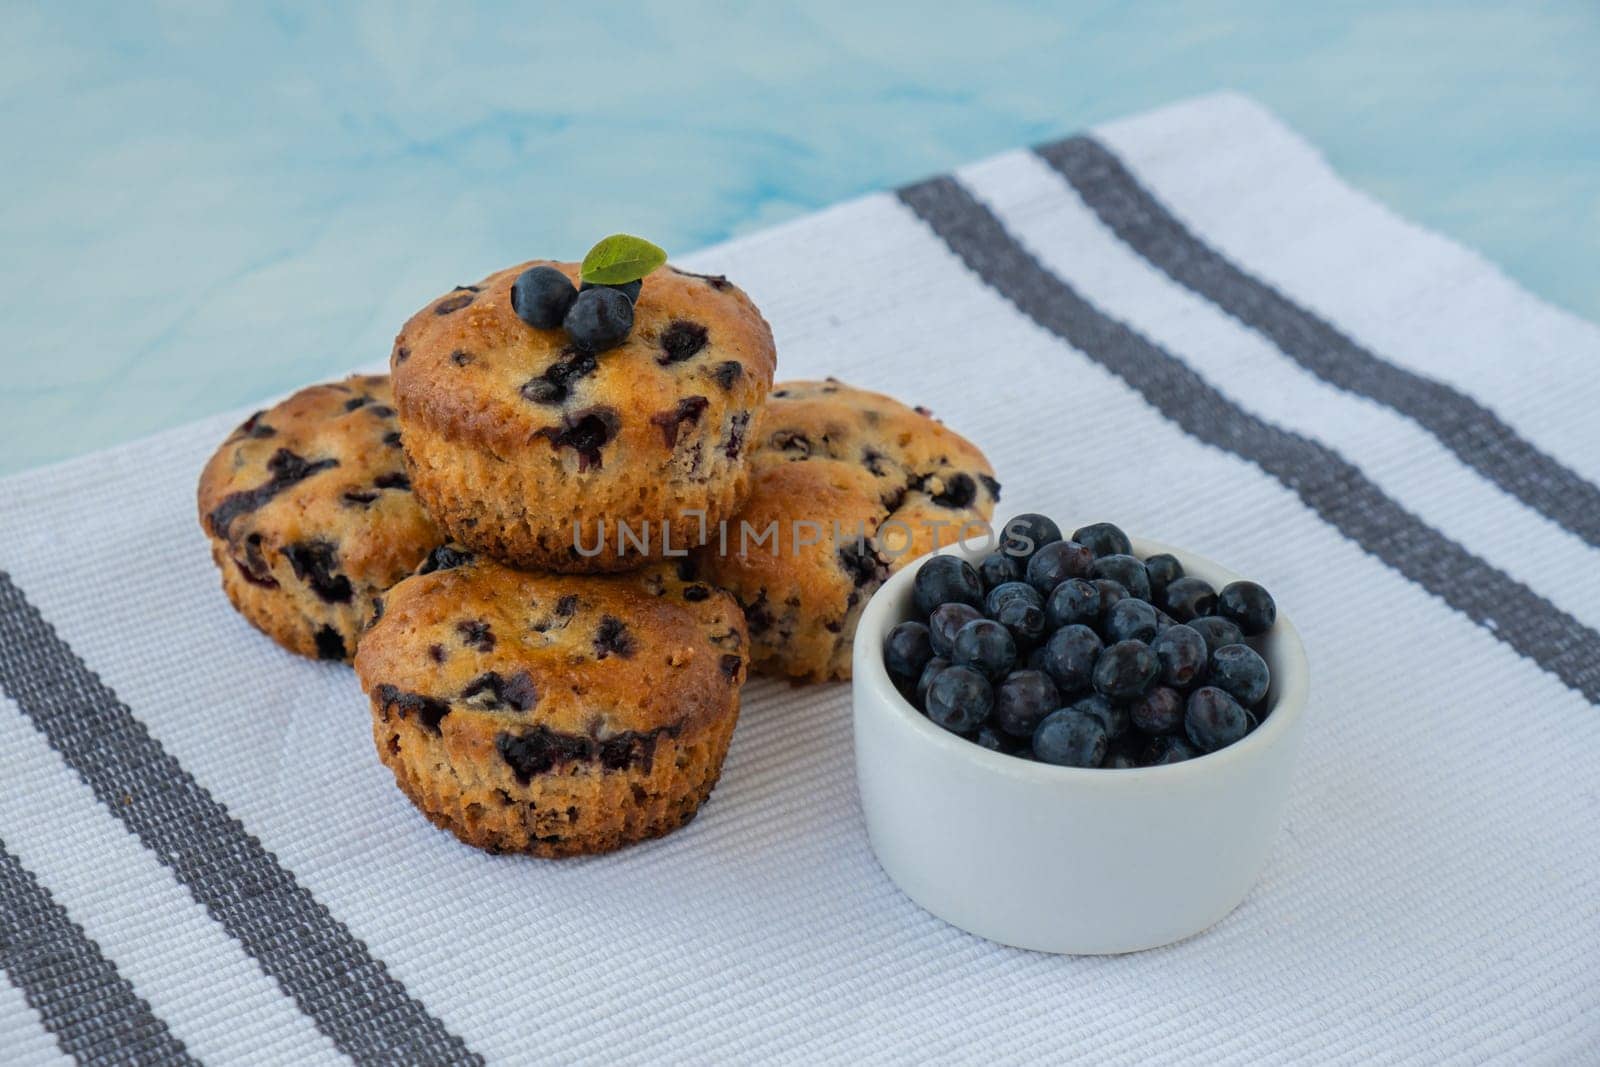 Homemade baked blueberry muffins with fresh blackberries. Tasty pastry sweet cupcake dessert. Berry pie Healthy vegan cupcakes with organic berries. Gluten free healthcare recipe from alternative flour